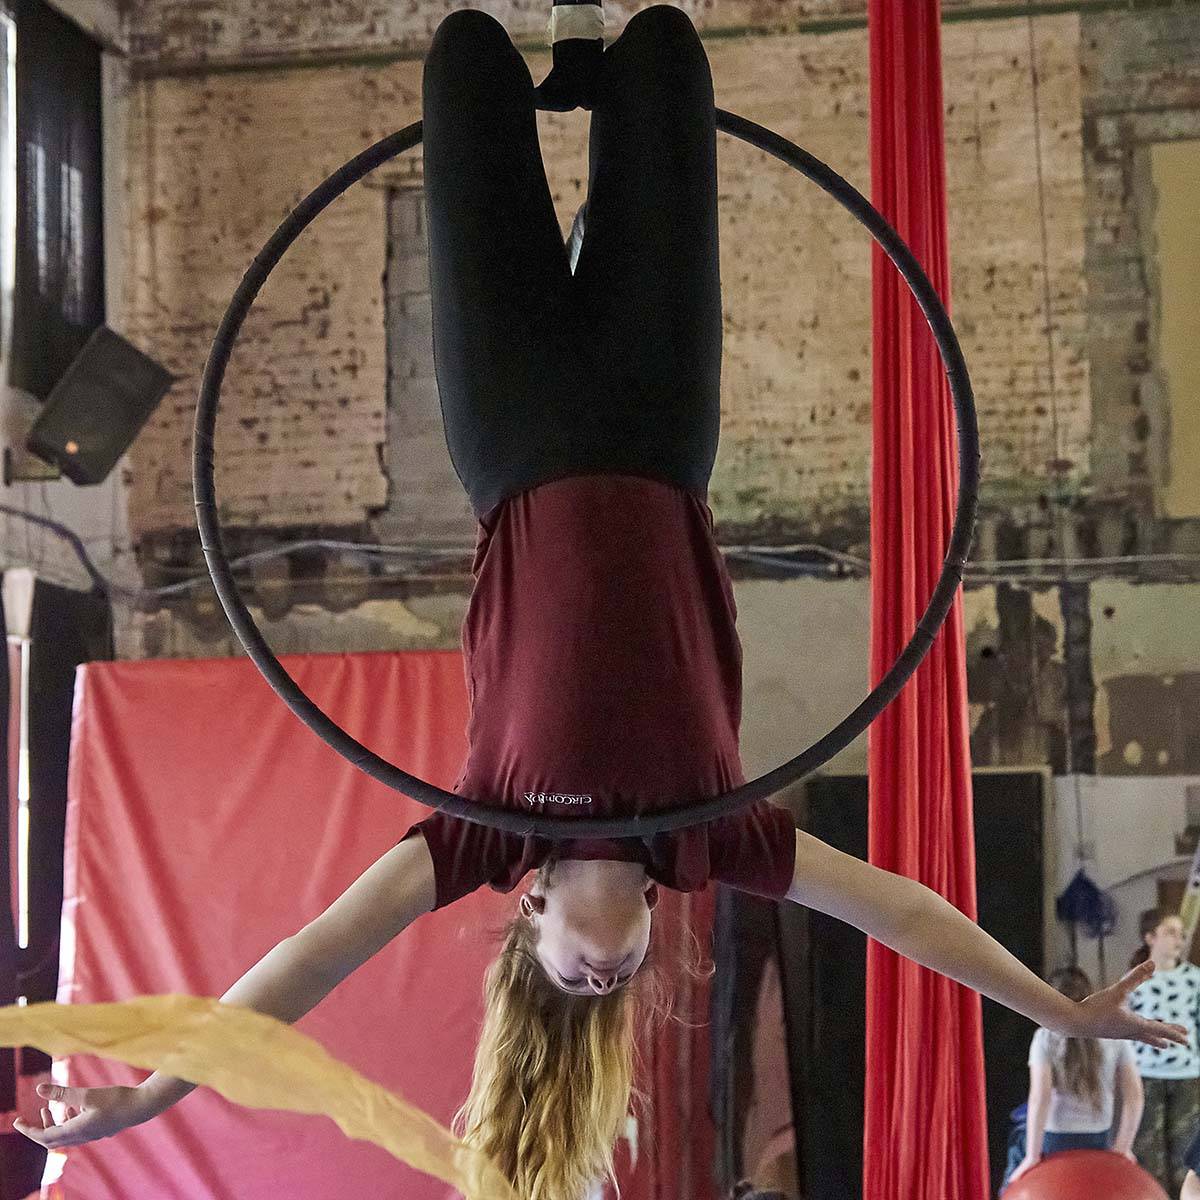 Youth Circus ages 11 to 18 years